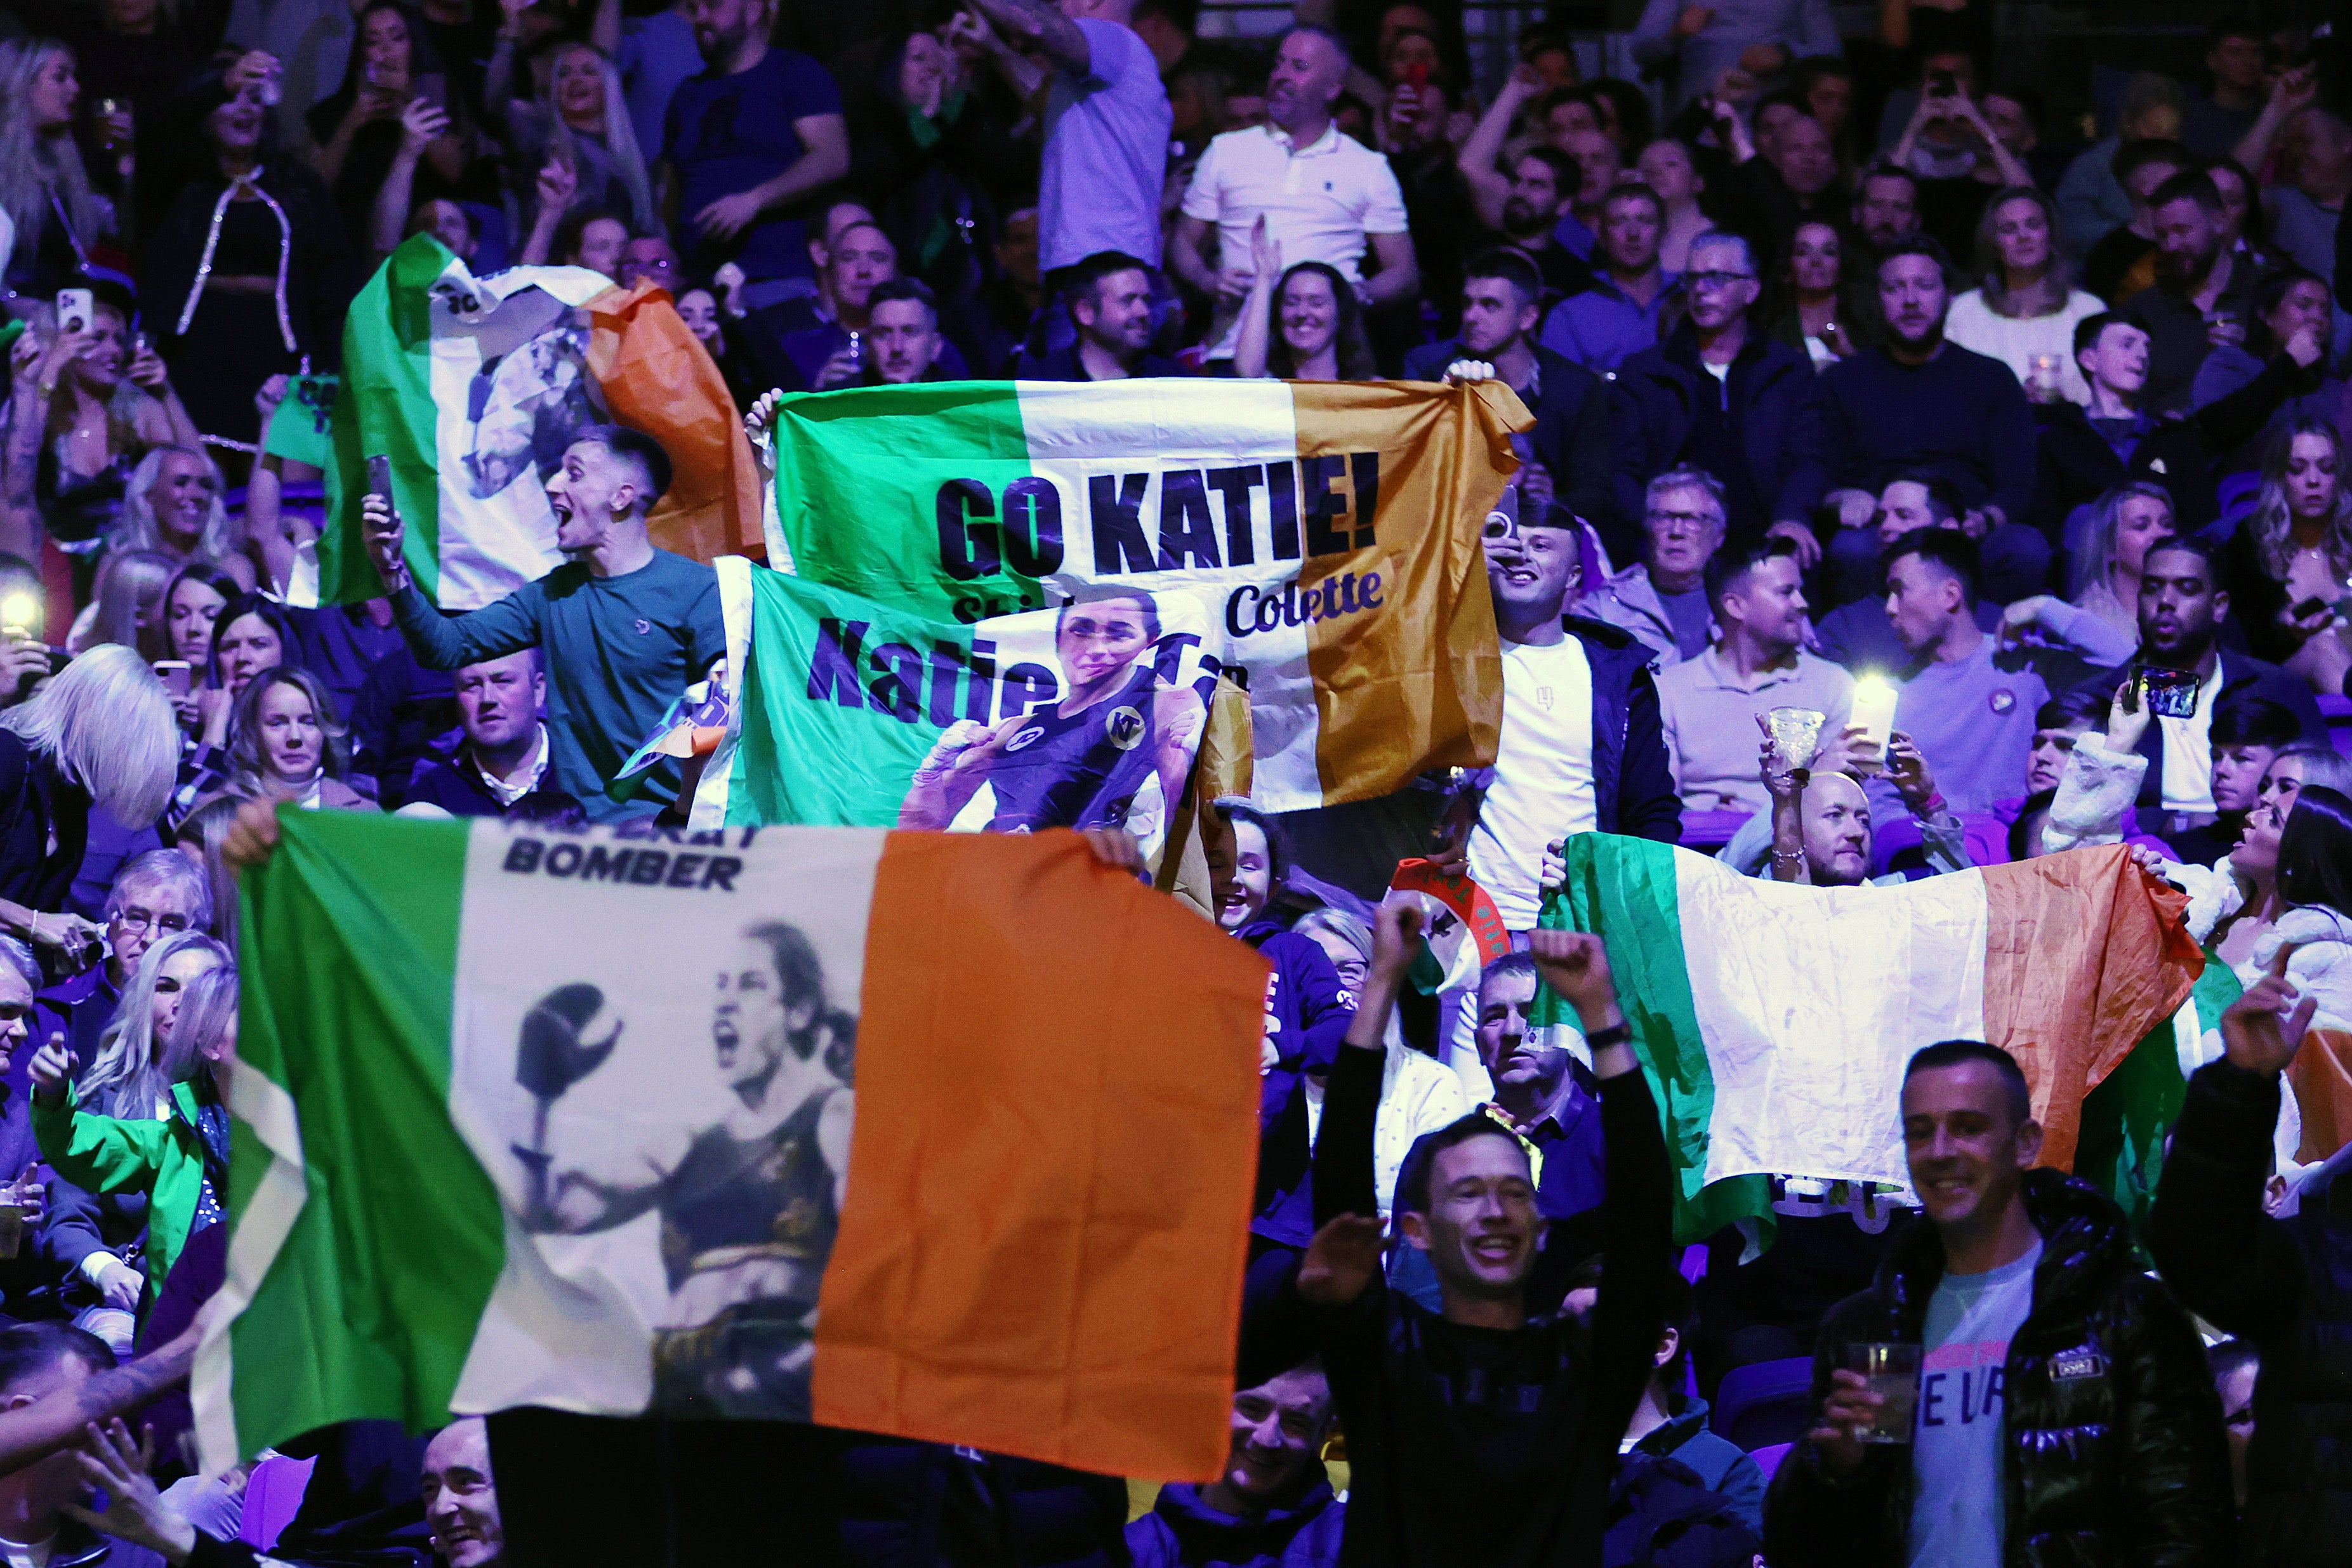 Irish fans show their support for Taylor, a boxing pioneer